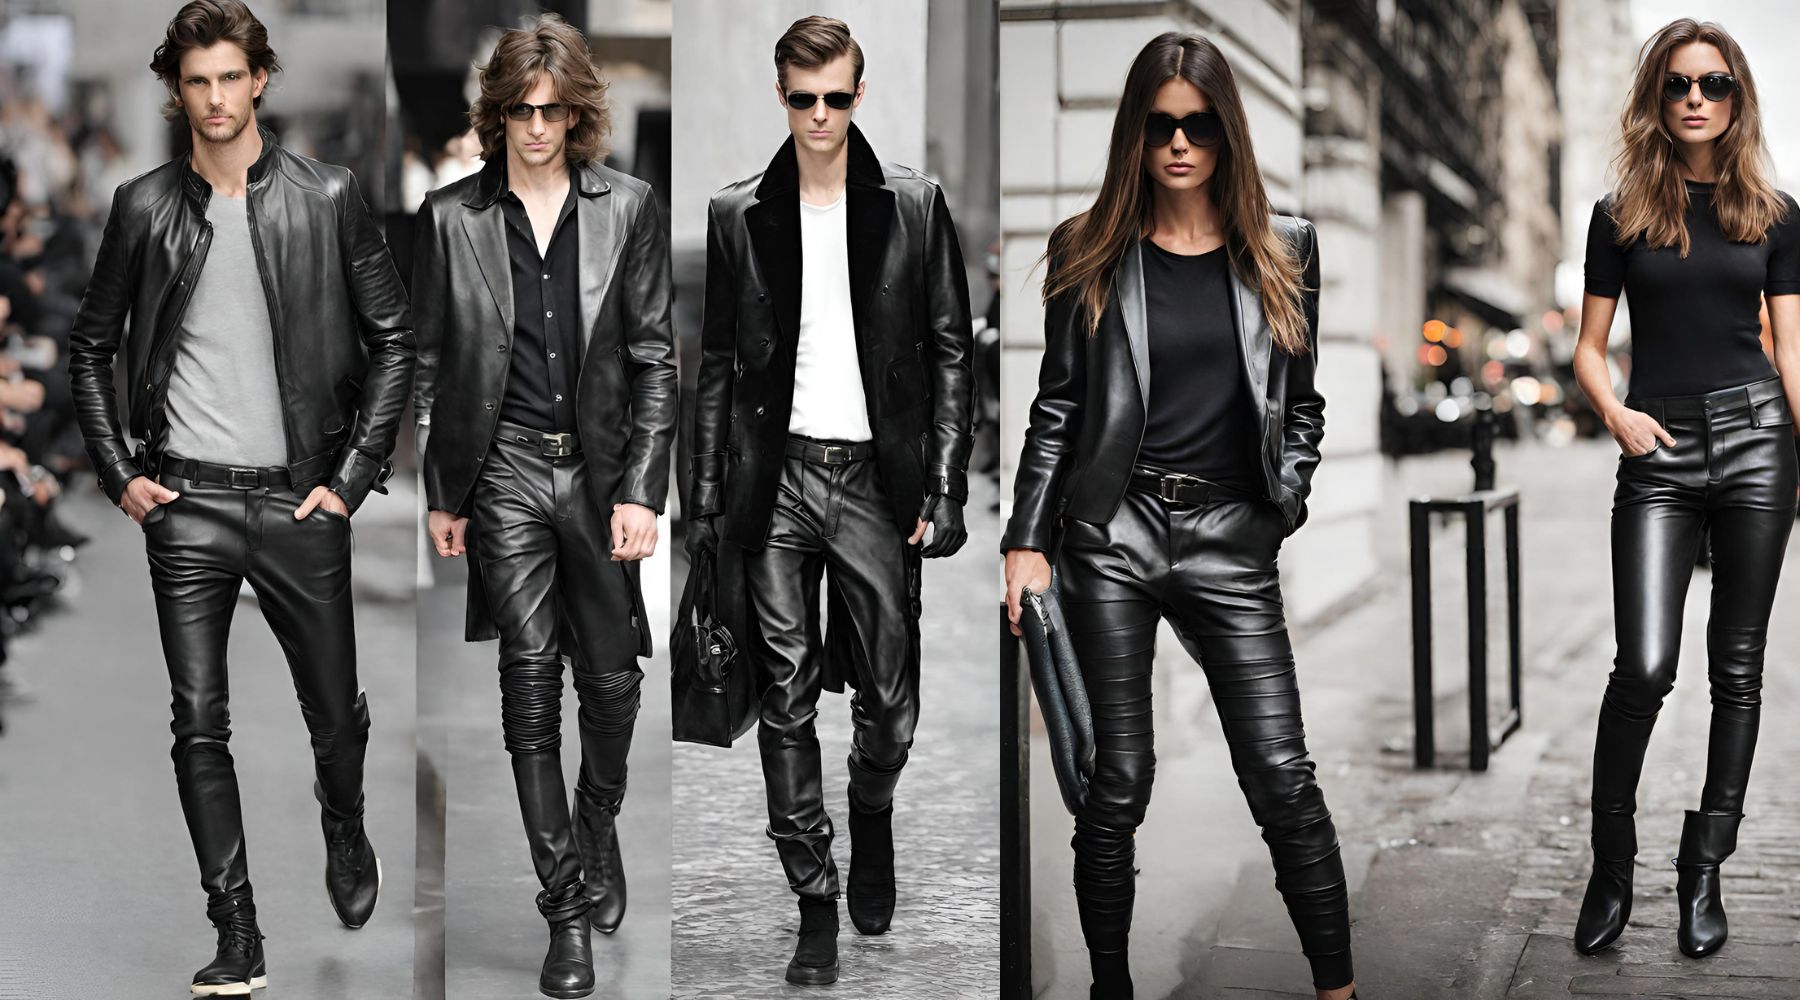 THE TOP REASON TO BUY LEATHER PANTS